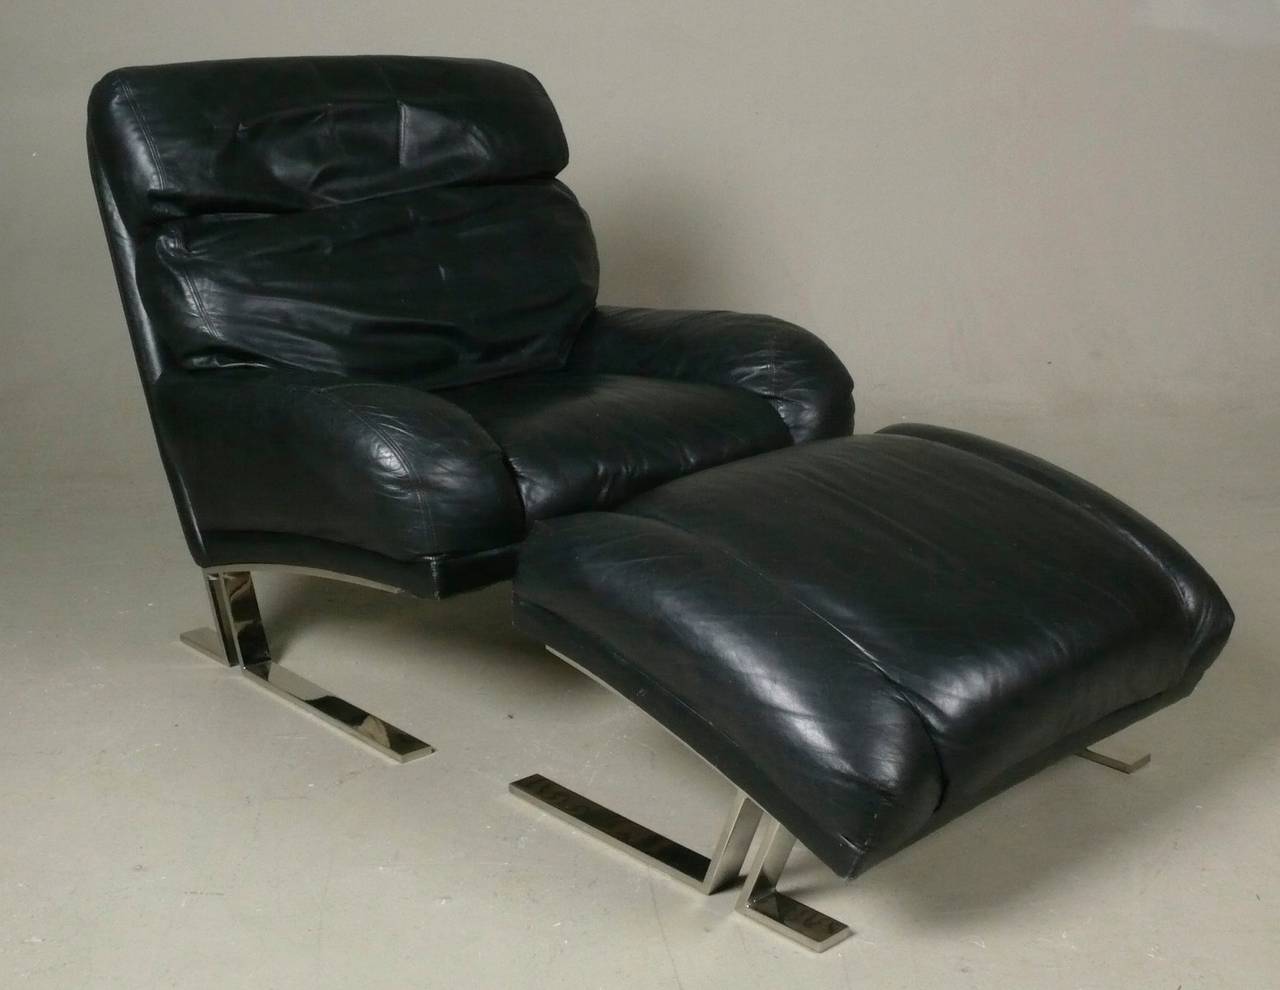 North American Leather and Chrome Lounge Chair and Ottoman by Milo Baughman